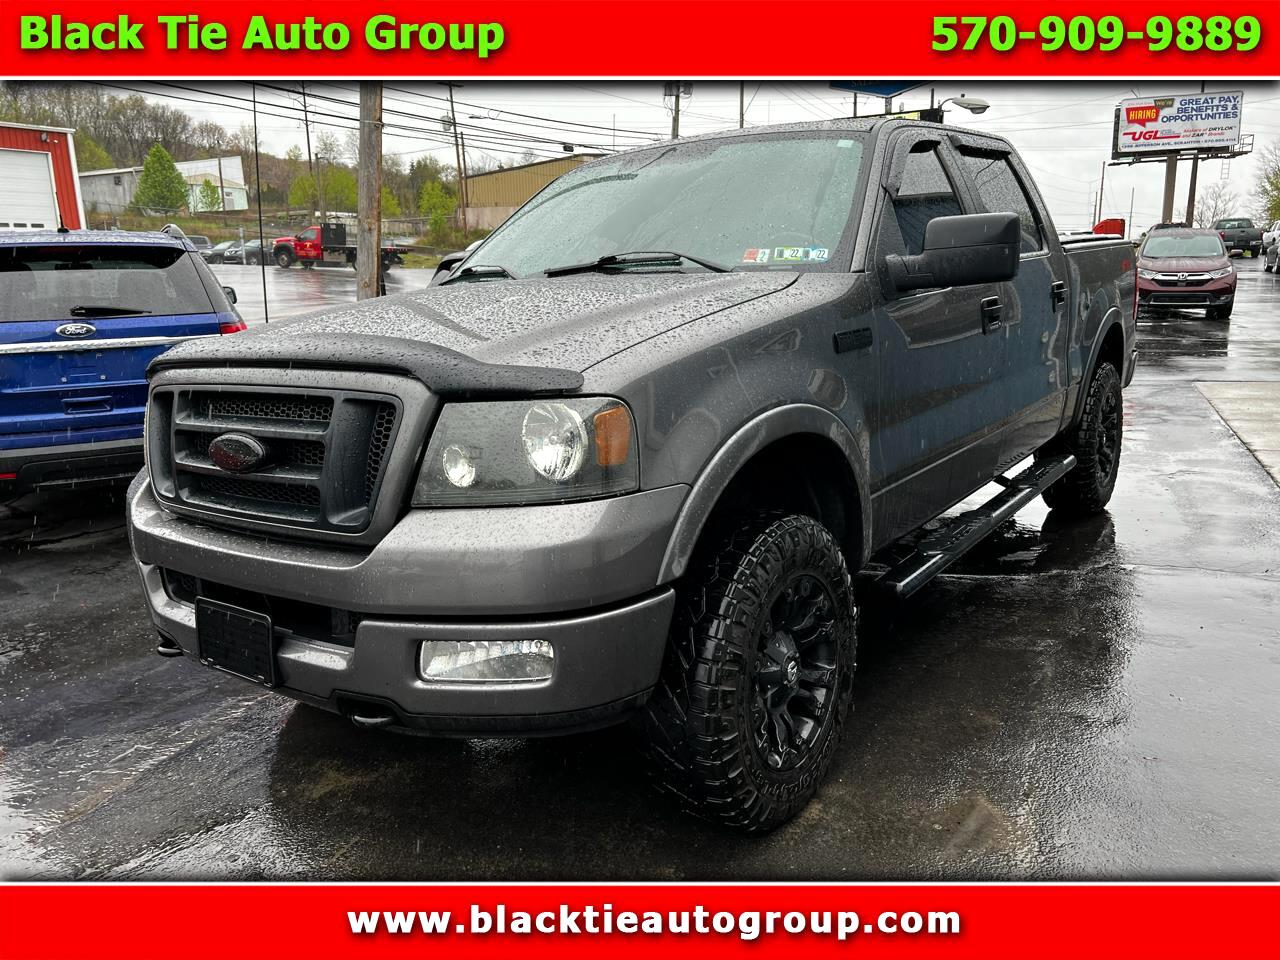 Ford F-150 SuperCrew 139" FX4 4WD 2005